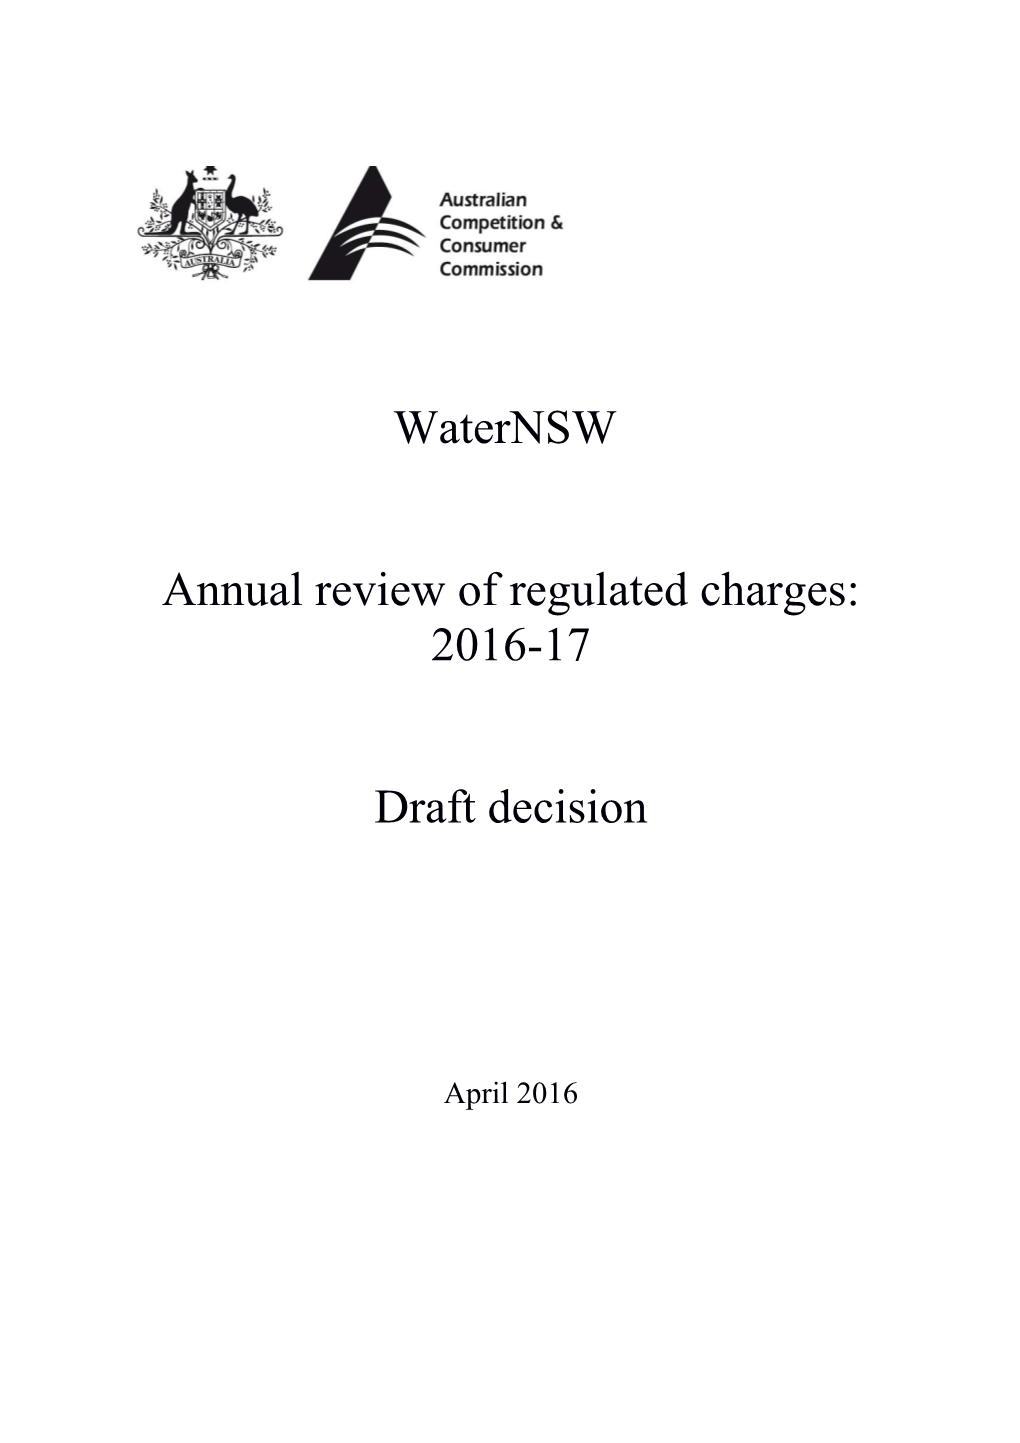 Annual Review of Regulated Charges: 2016-17